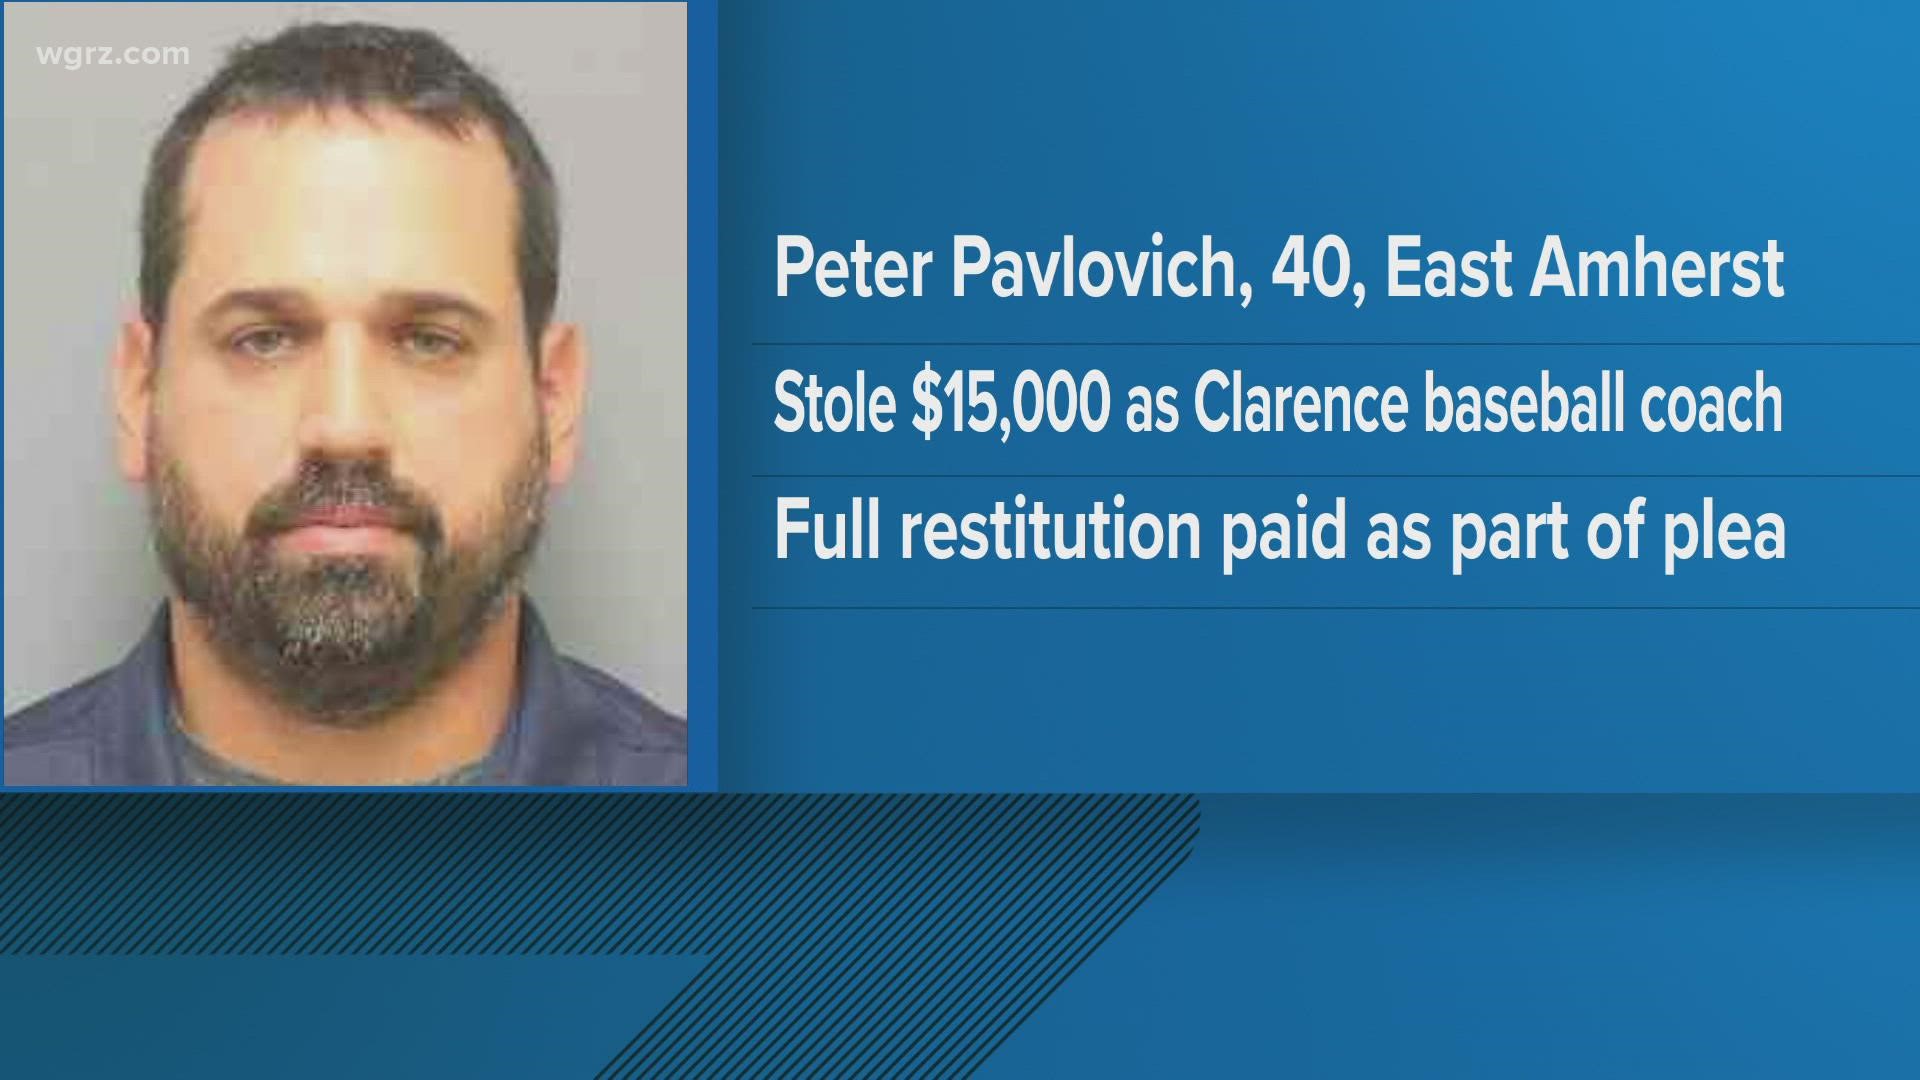 The Erie County D-A's office says 40-year-old Peter Pavlovich of East Amherst pleaded guilty to attempted grand larceny.